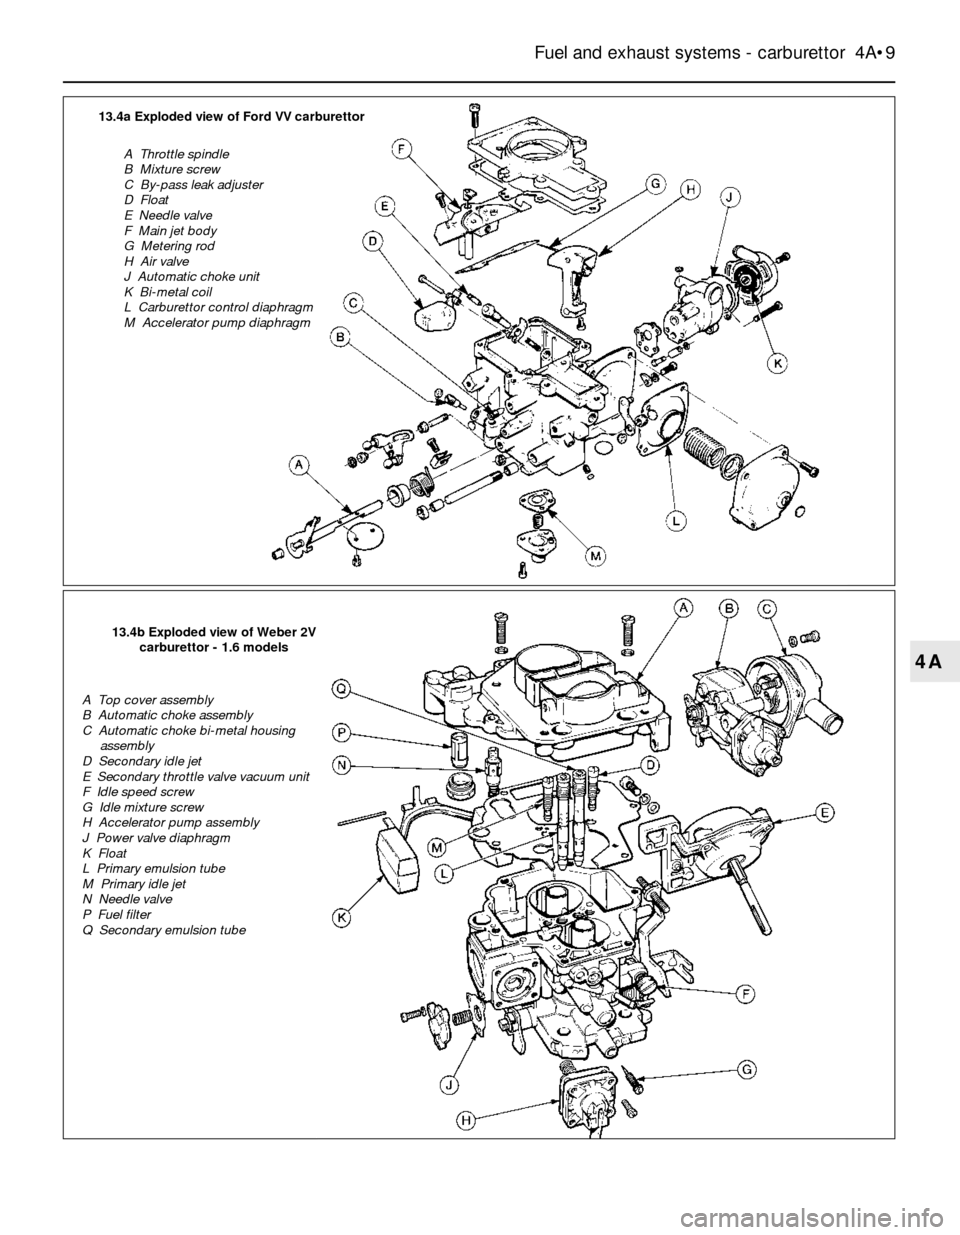 FORD SIERRA 1990 2.G Fuel And Exhaust Systems Carburettor Workshop Manual Fuel and exhaust systems - carburettor  4A•9
4A
13.4a Exploded view of Ford VV carburettor
A  Throttle spindle
B  Mixture screw
C  By-pass leak adjuster
D  Float
E  Needle valve
F  Main jet body
G  